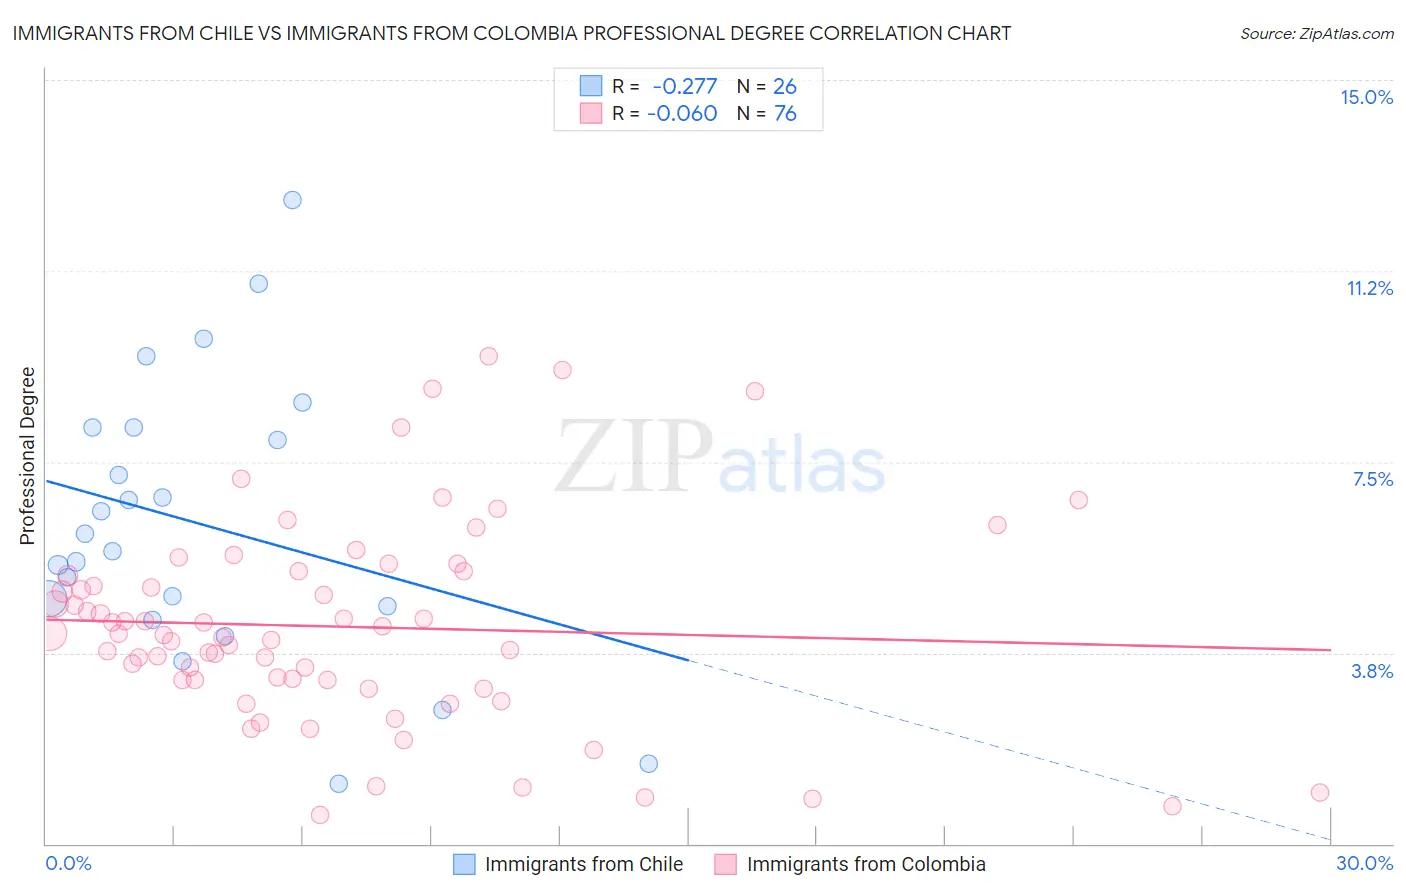 Immigrants from Chile vs Immigrants from Colombia Professional Degree